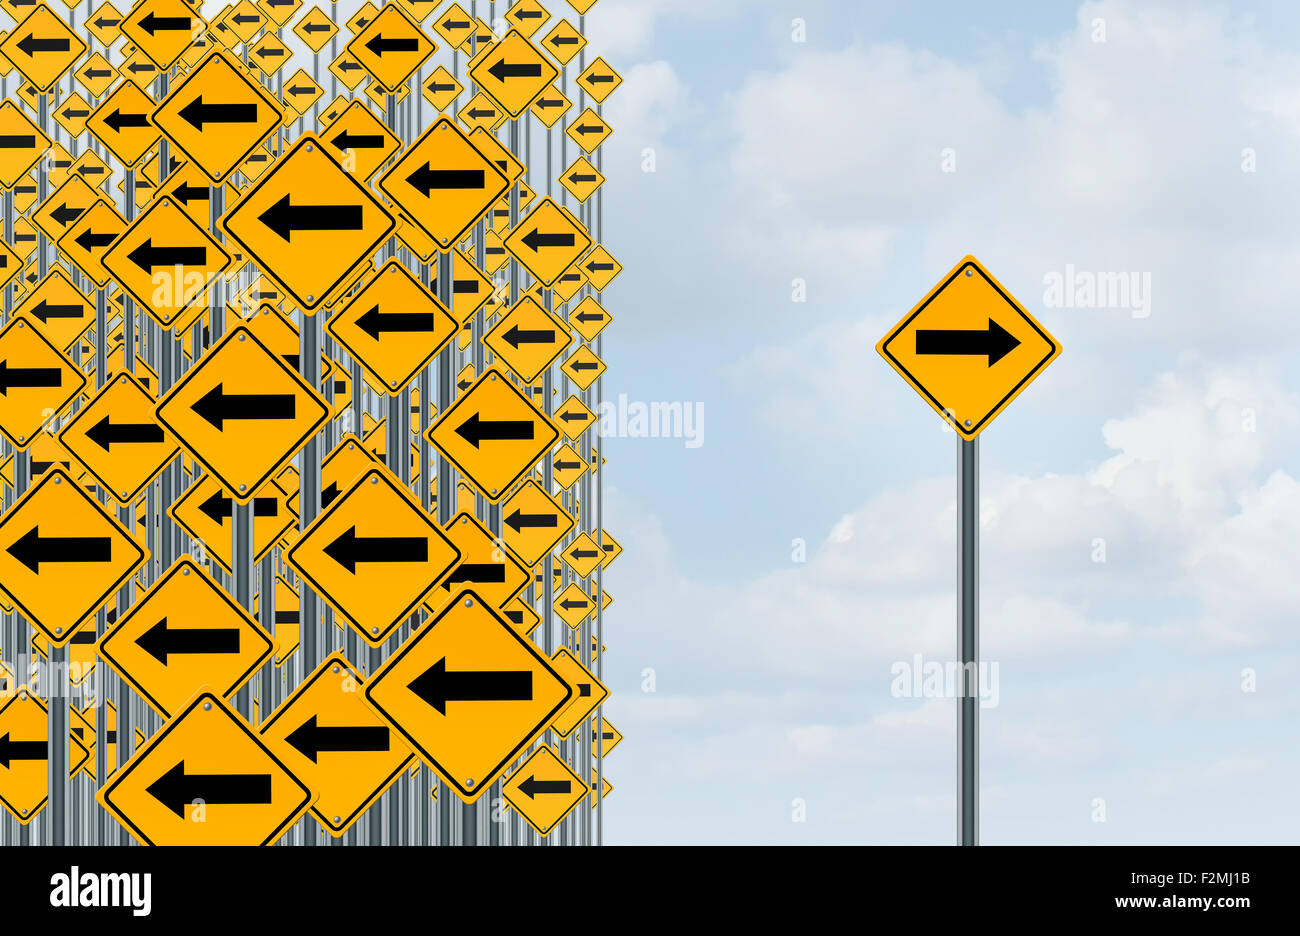 Direction individuality and independent thinking concept as a group of directional arrow traffic signs with one individual pointing in the opposite way as a business icon for innovative solution. Stock Photo